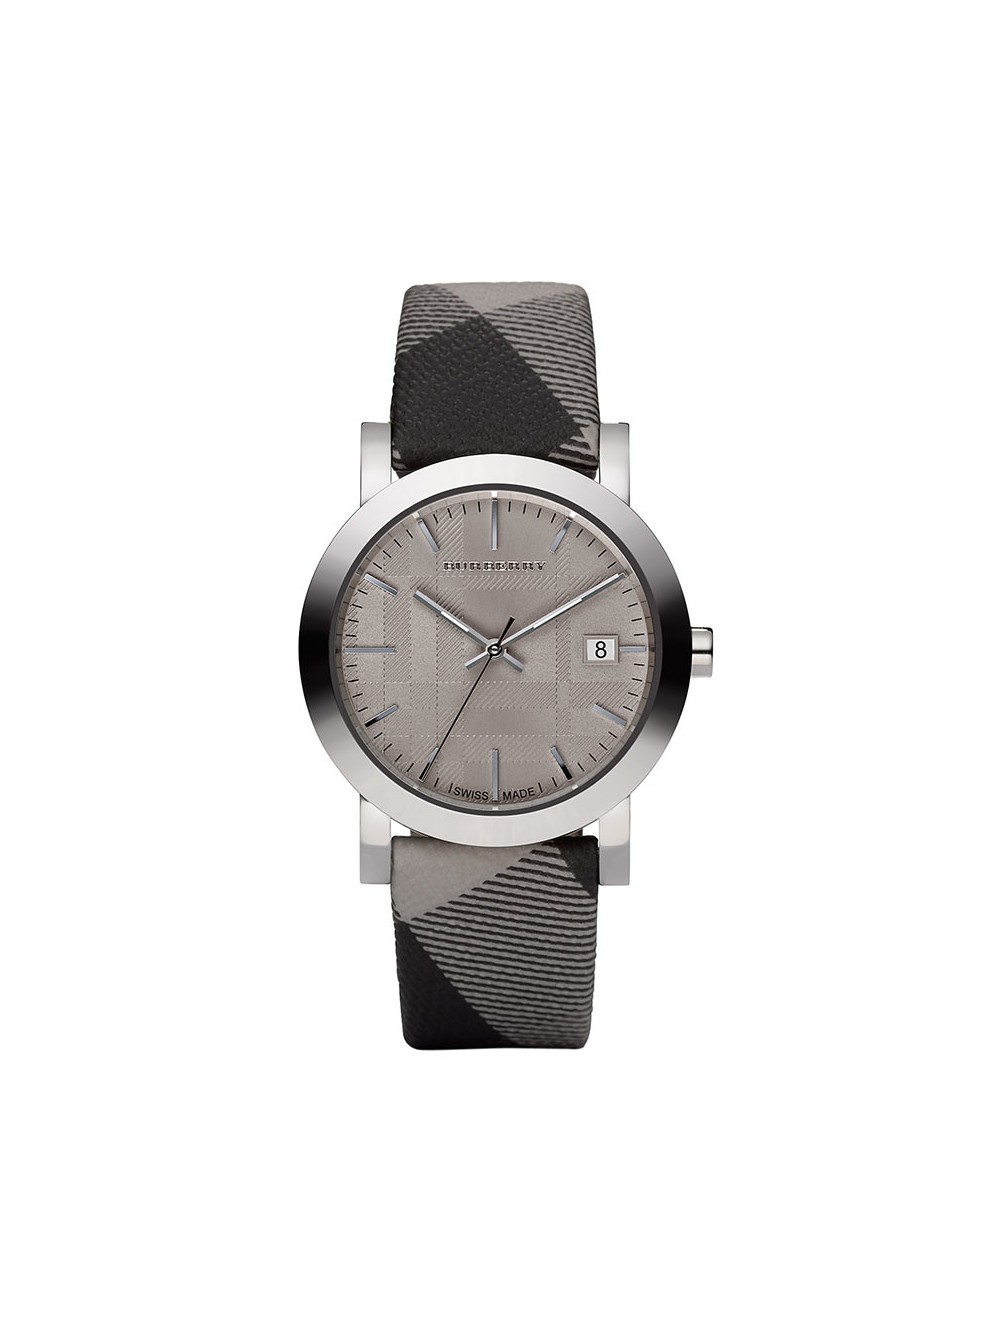 burberry watch black leather strap